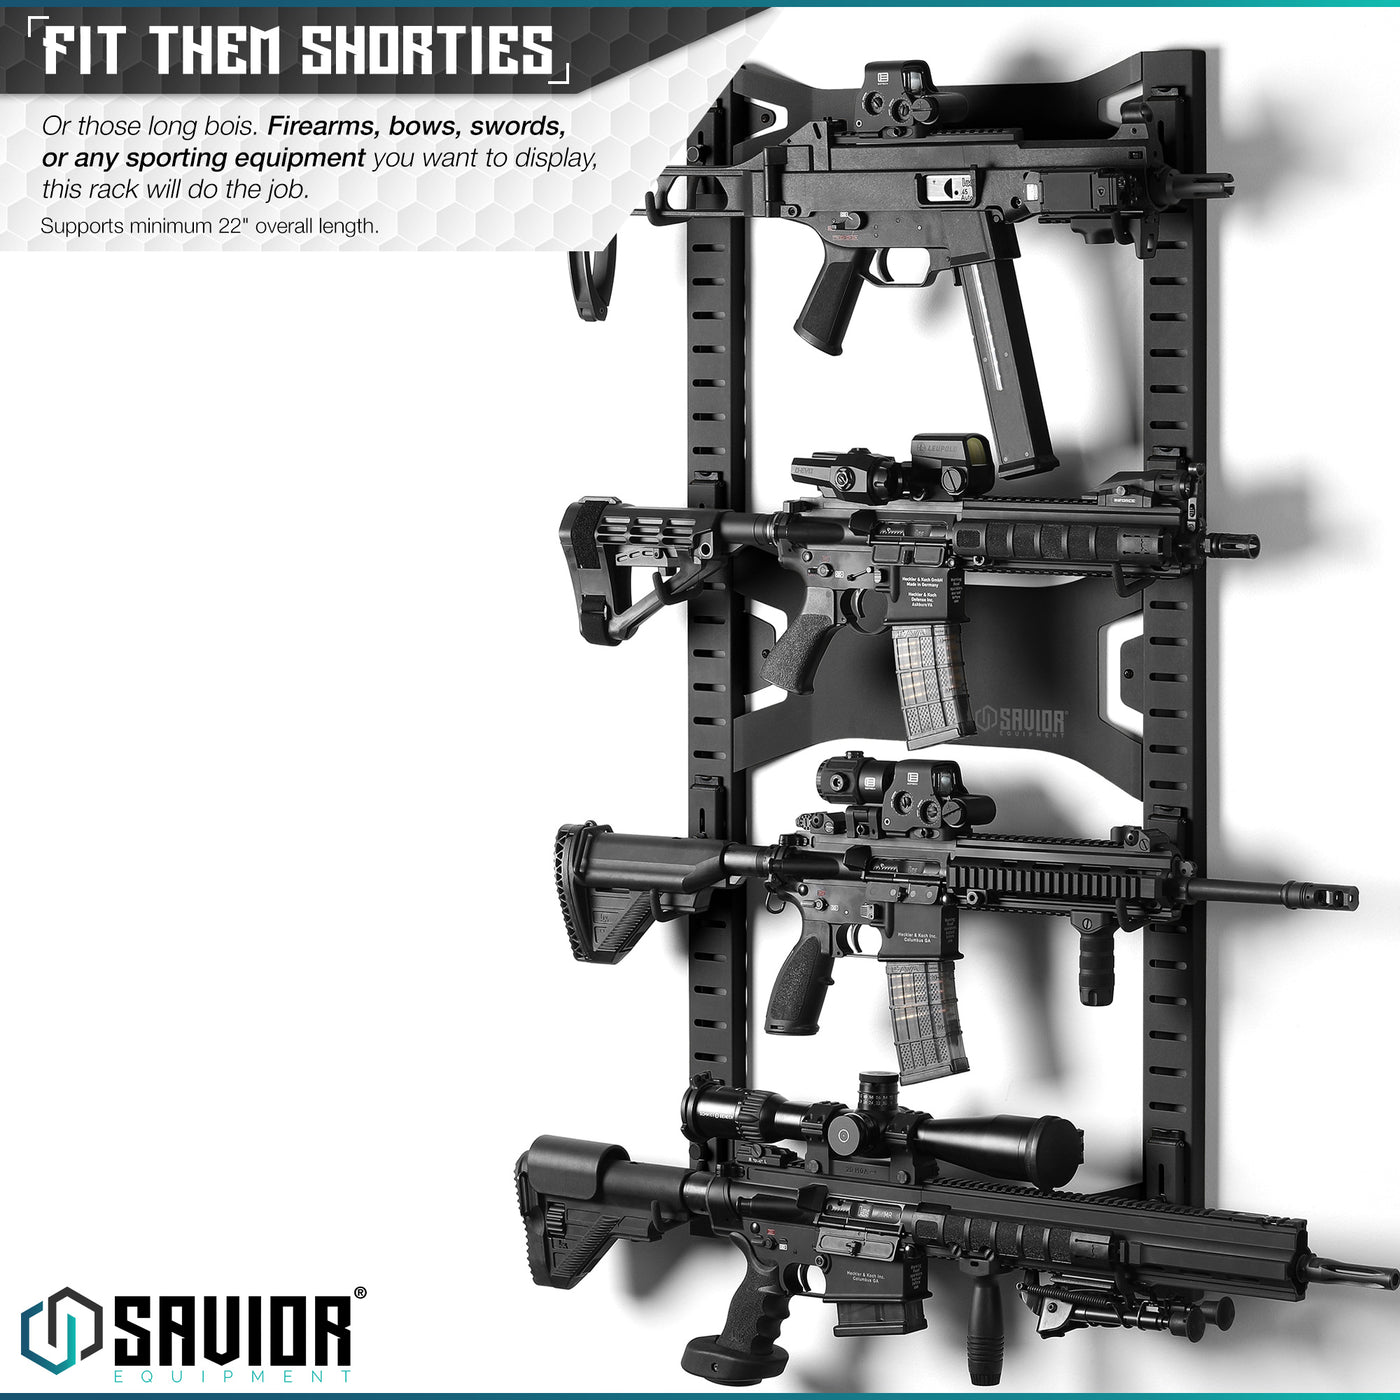 Fit Them Shorties - Or those long bois. Firearms, bows and arrows, or any sporting equipment you want to display, this rack will do the job. Supports minimum 22" overall length.